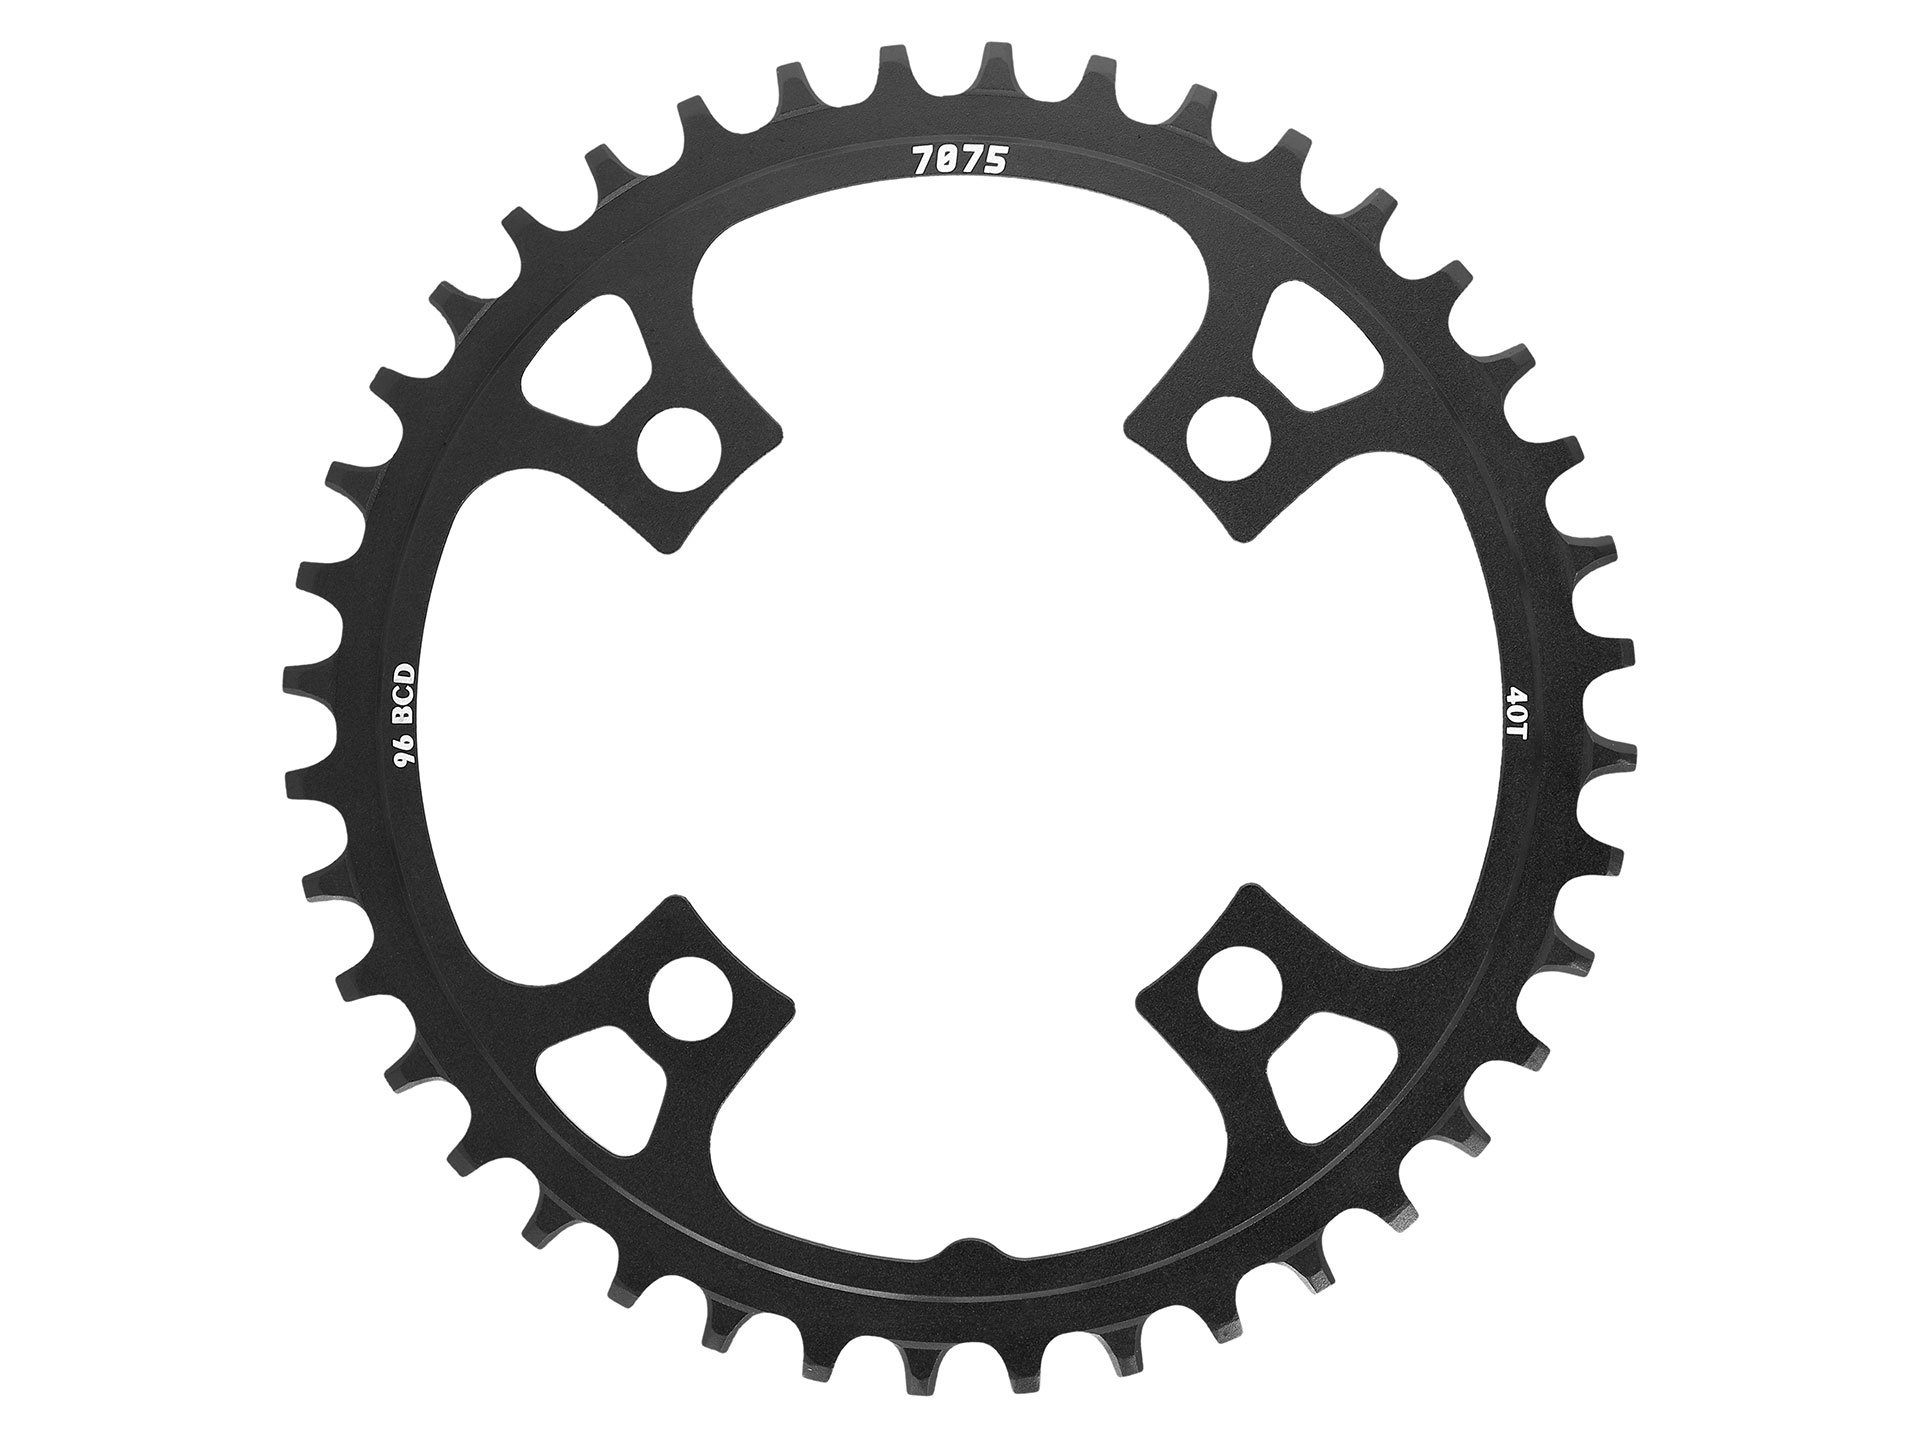 30T 96 BCD Narrow-Wide Alloy Chainring Black Sunrace